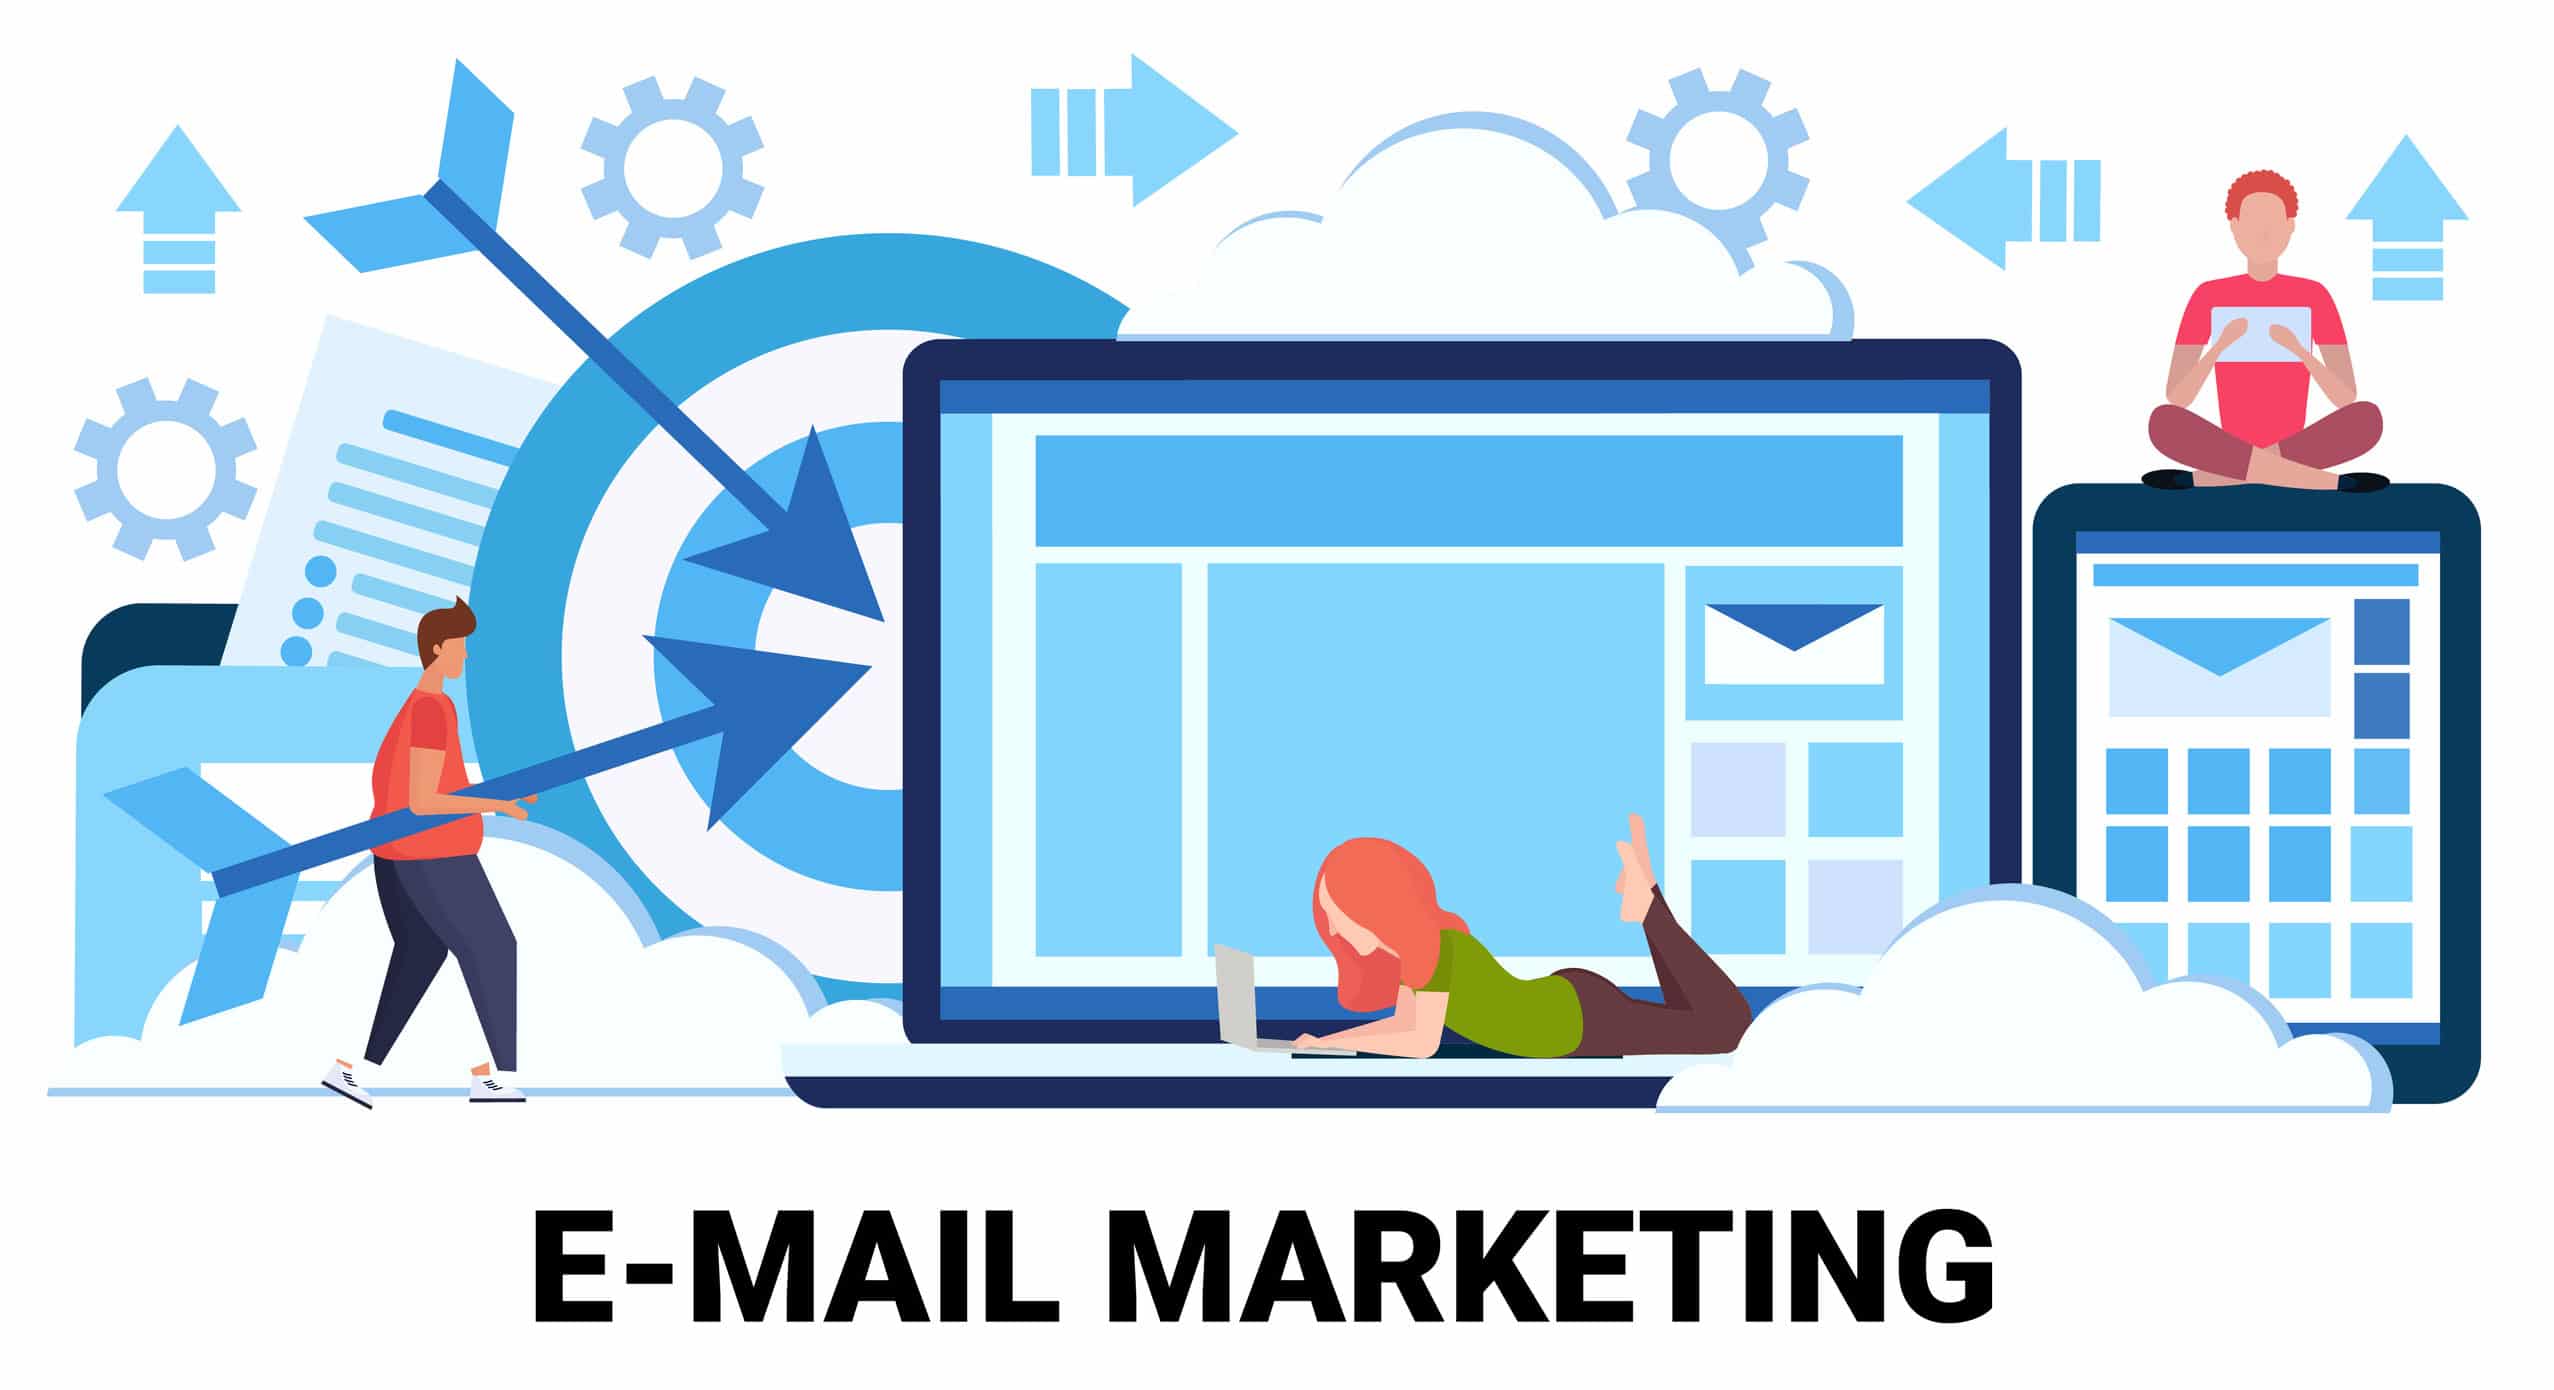 Stay informed of direct marketing trends